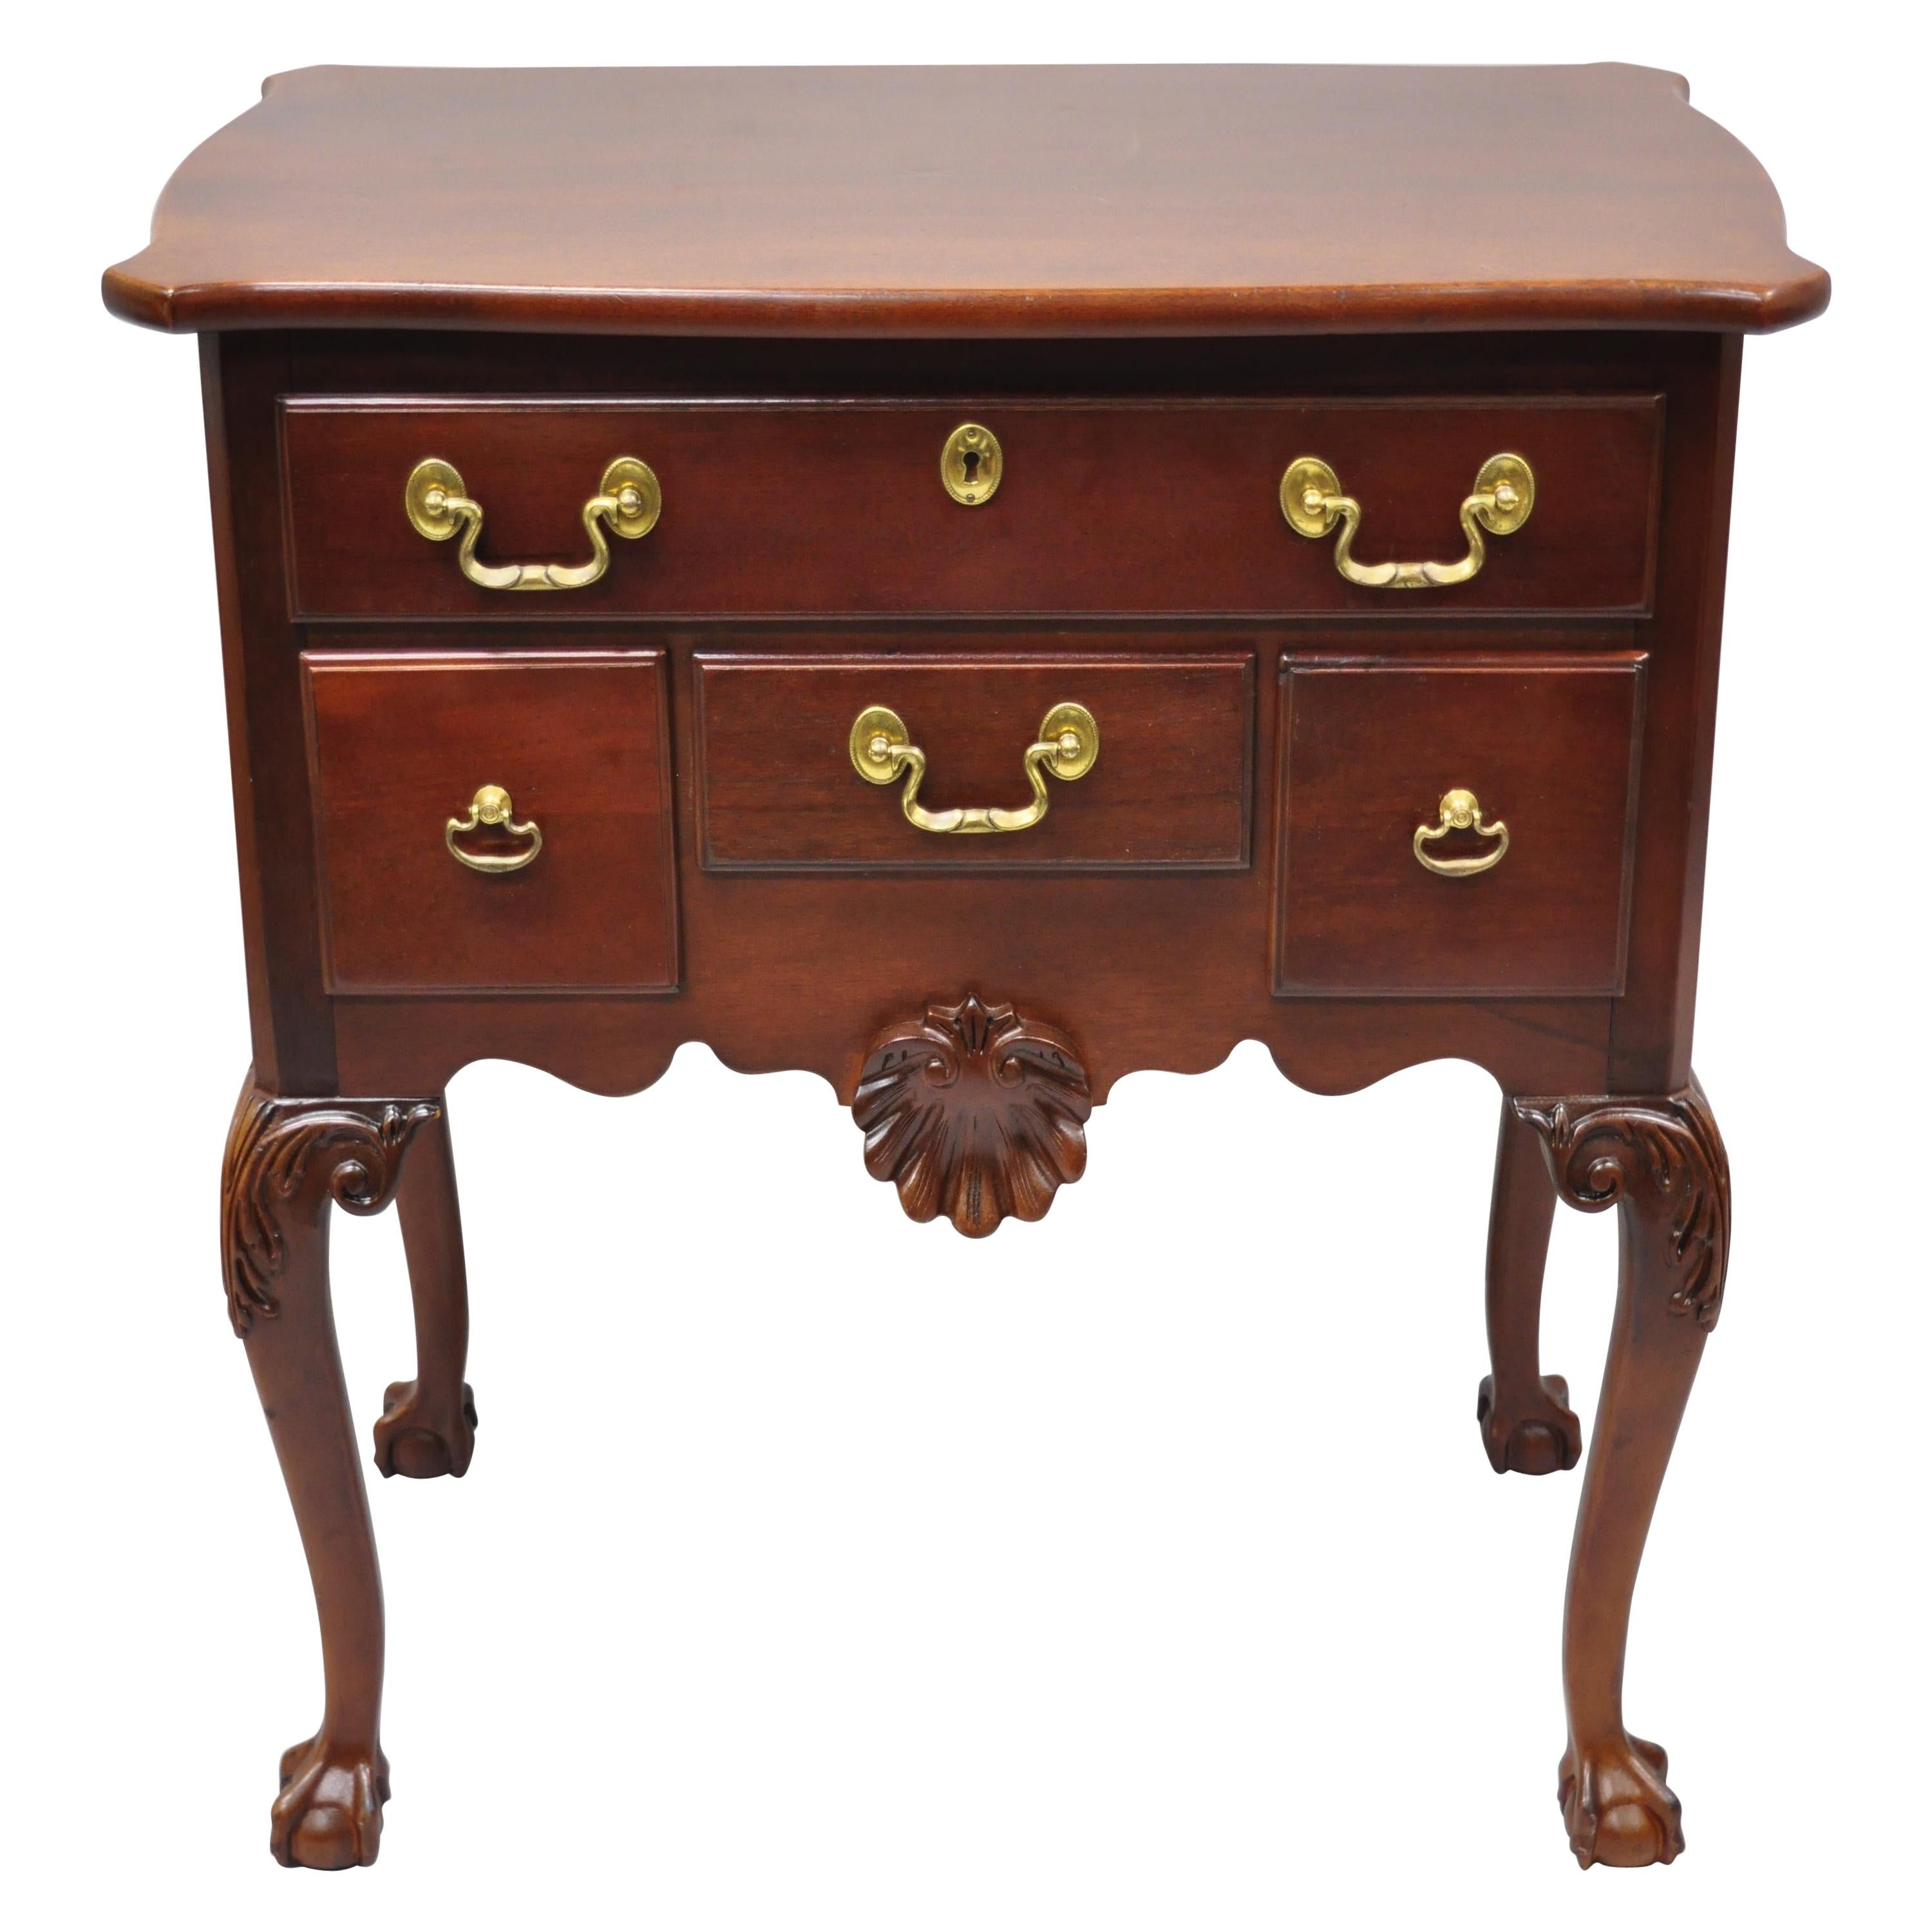 Vintage Chippendale Mahogany Ball and Claw Lowboy Chest by Lexington Heirloom